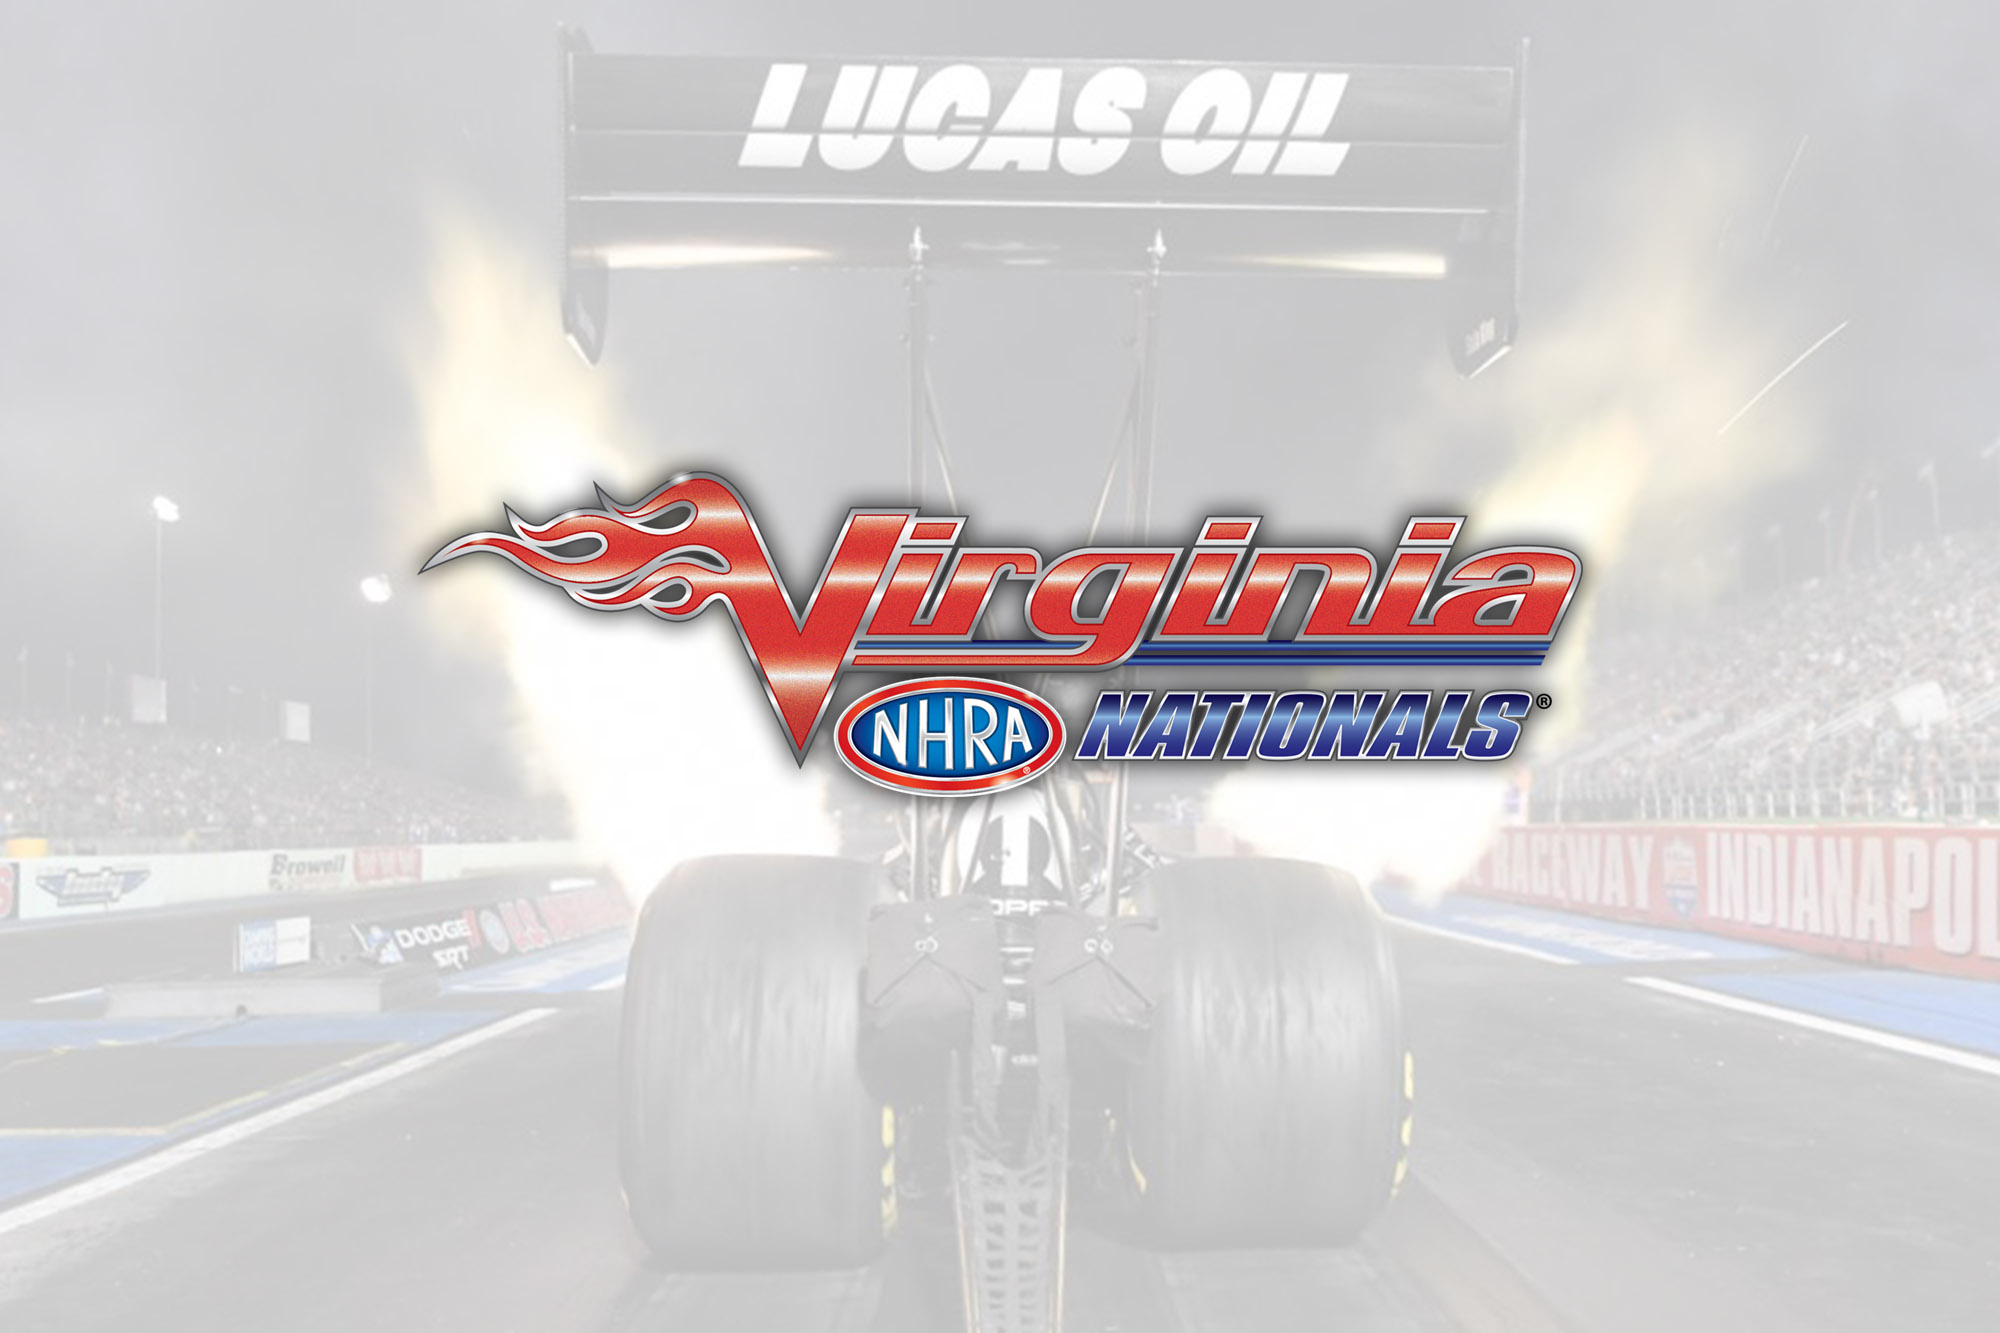 NHRA Announces Schedule for All Categories During 2022 Season, including Virginia NHRA Nationals